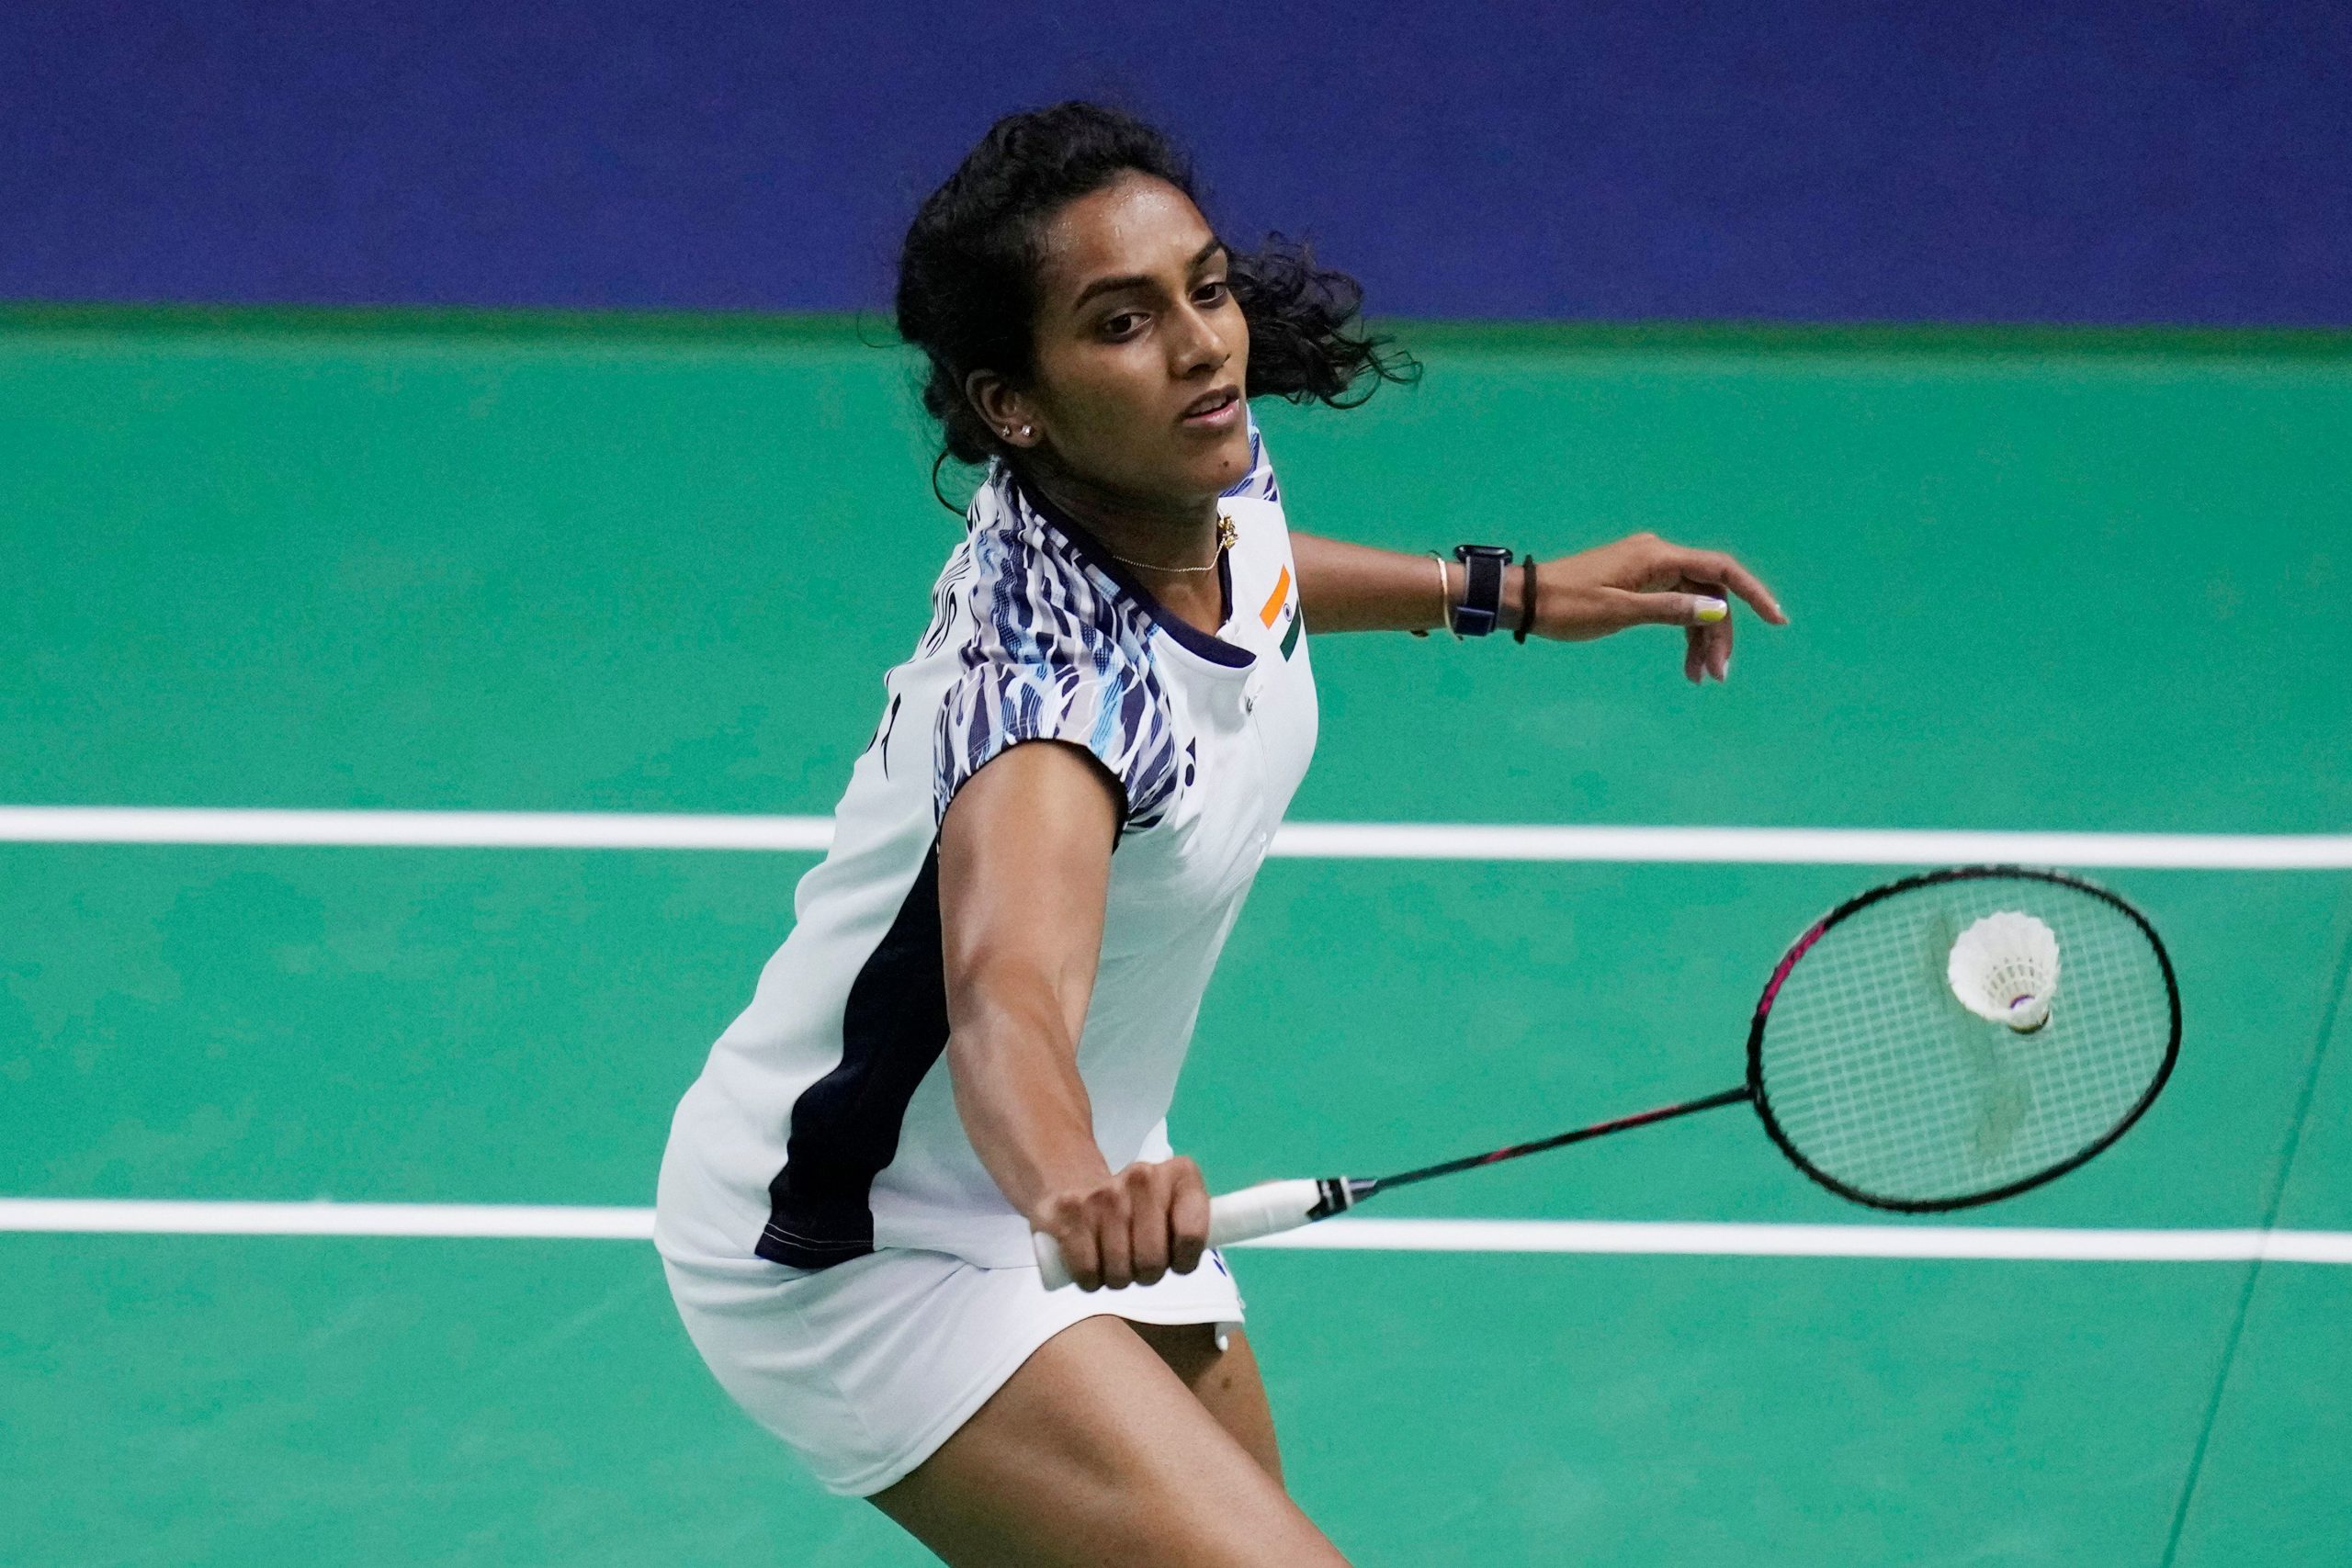 ‘Great honour’: PV Sindhu reacts after being named Indian flagbearer at Commonwealth Games 2022